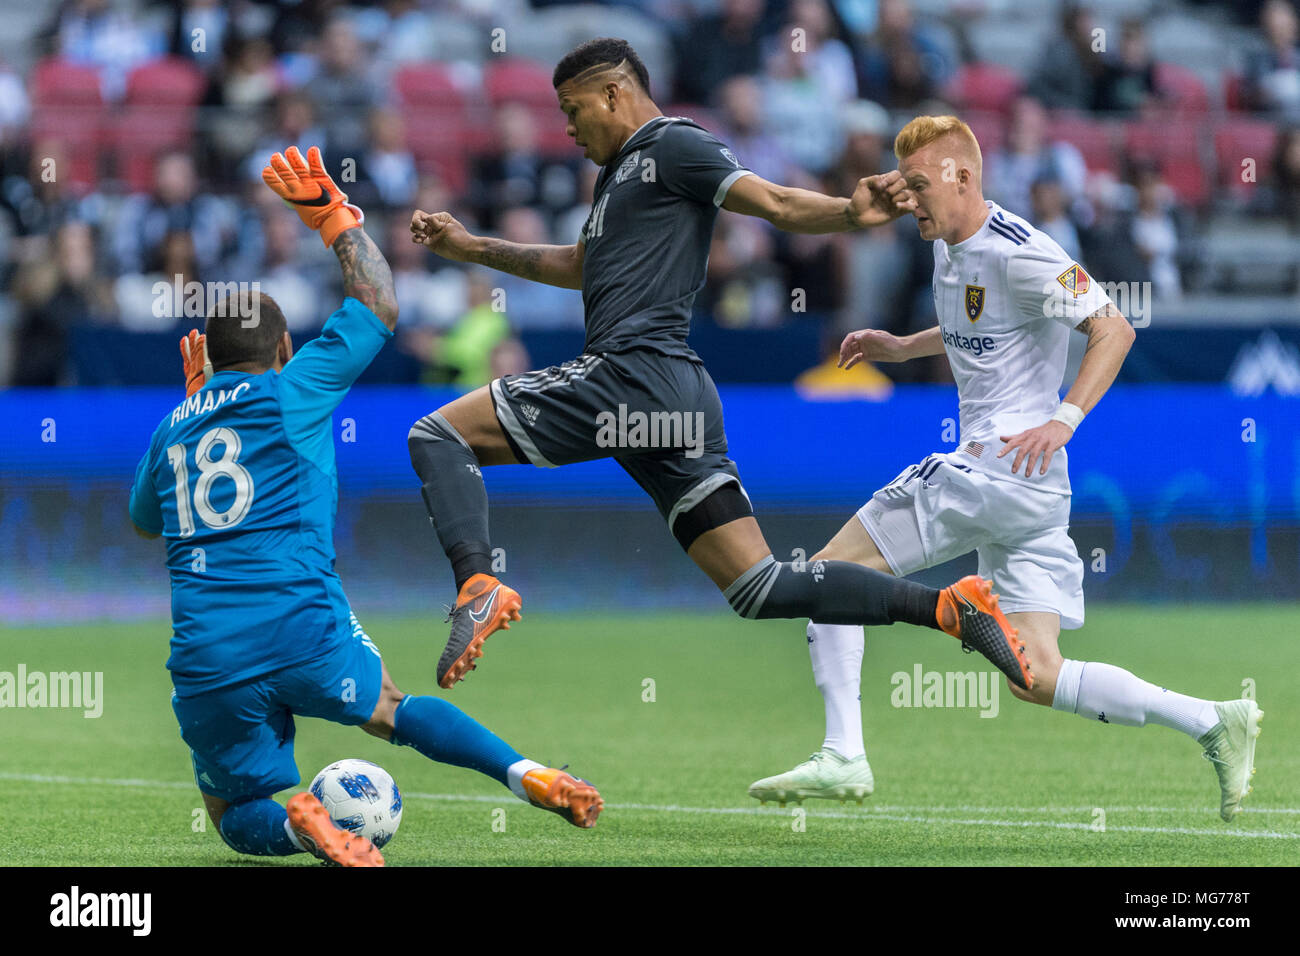 Vancouver, Canada. 27 April 2018. Anthony Blondell (9) of Vancouver Whitecaps (center), trying to get past Goalkeeper Nick Rimando (18) of Real Salt Lake.  Vancouver Whitecaps vs Real Salt Lake BC Place. Vancouver wins 2-0 © Gerry Rousseau/Alamy Live News Stock Photo